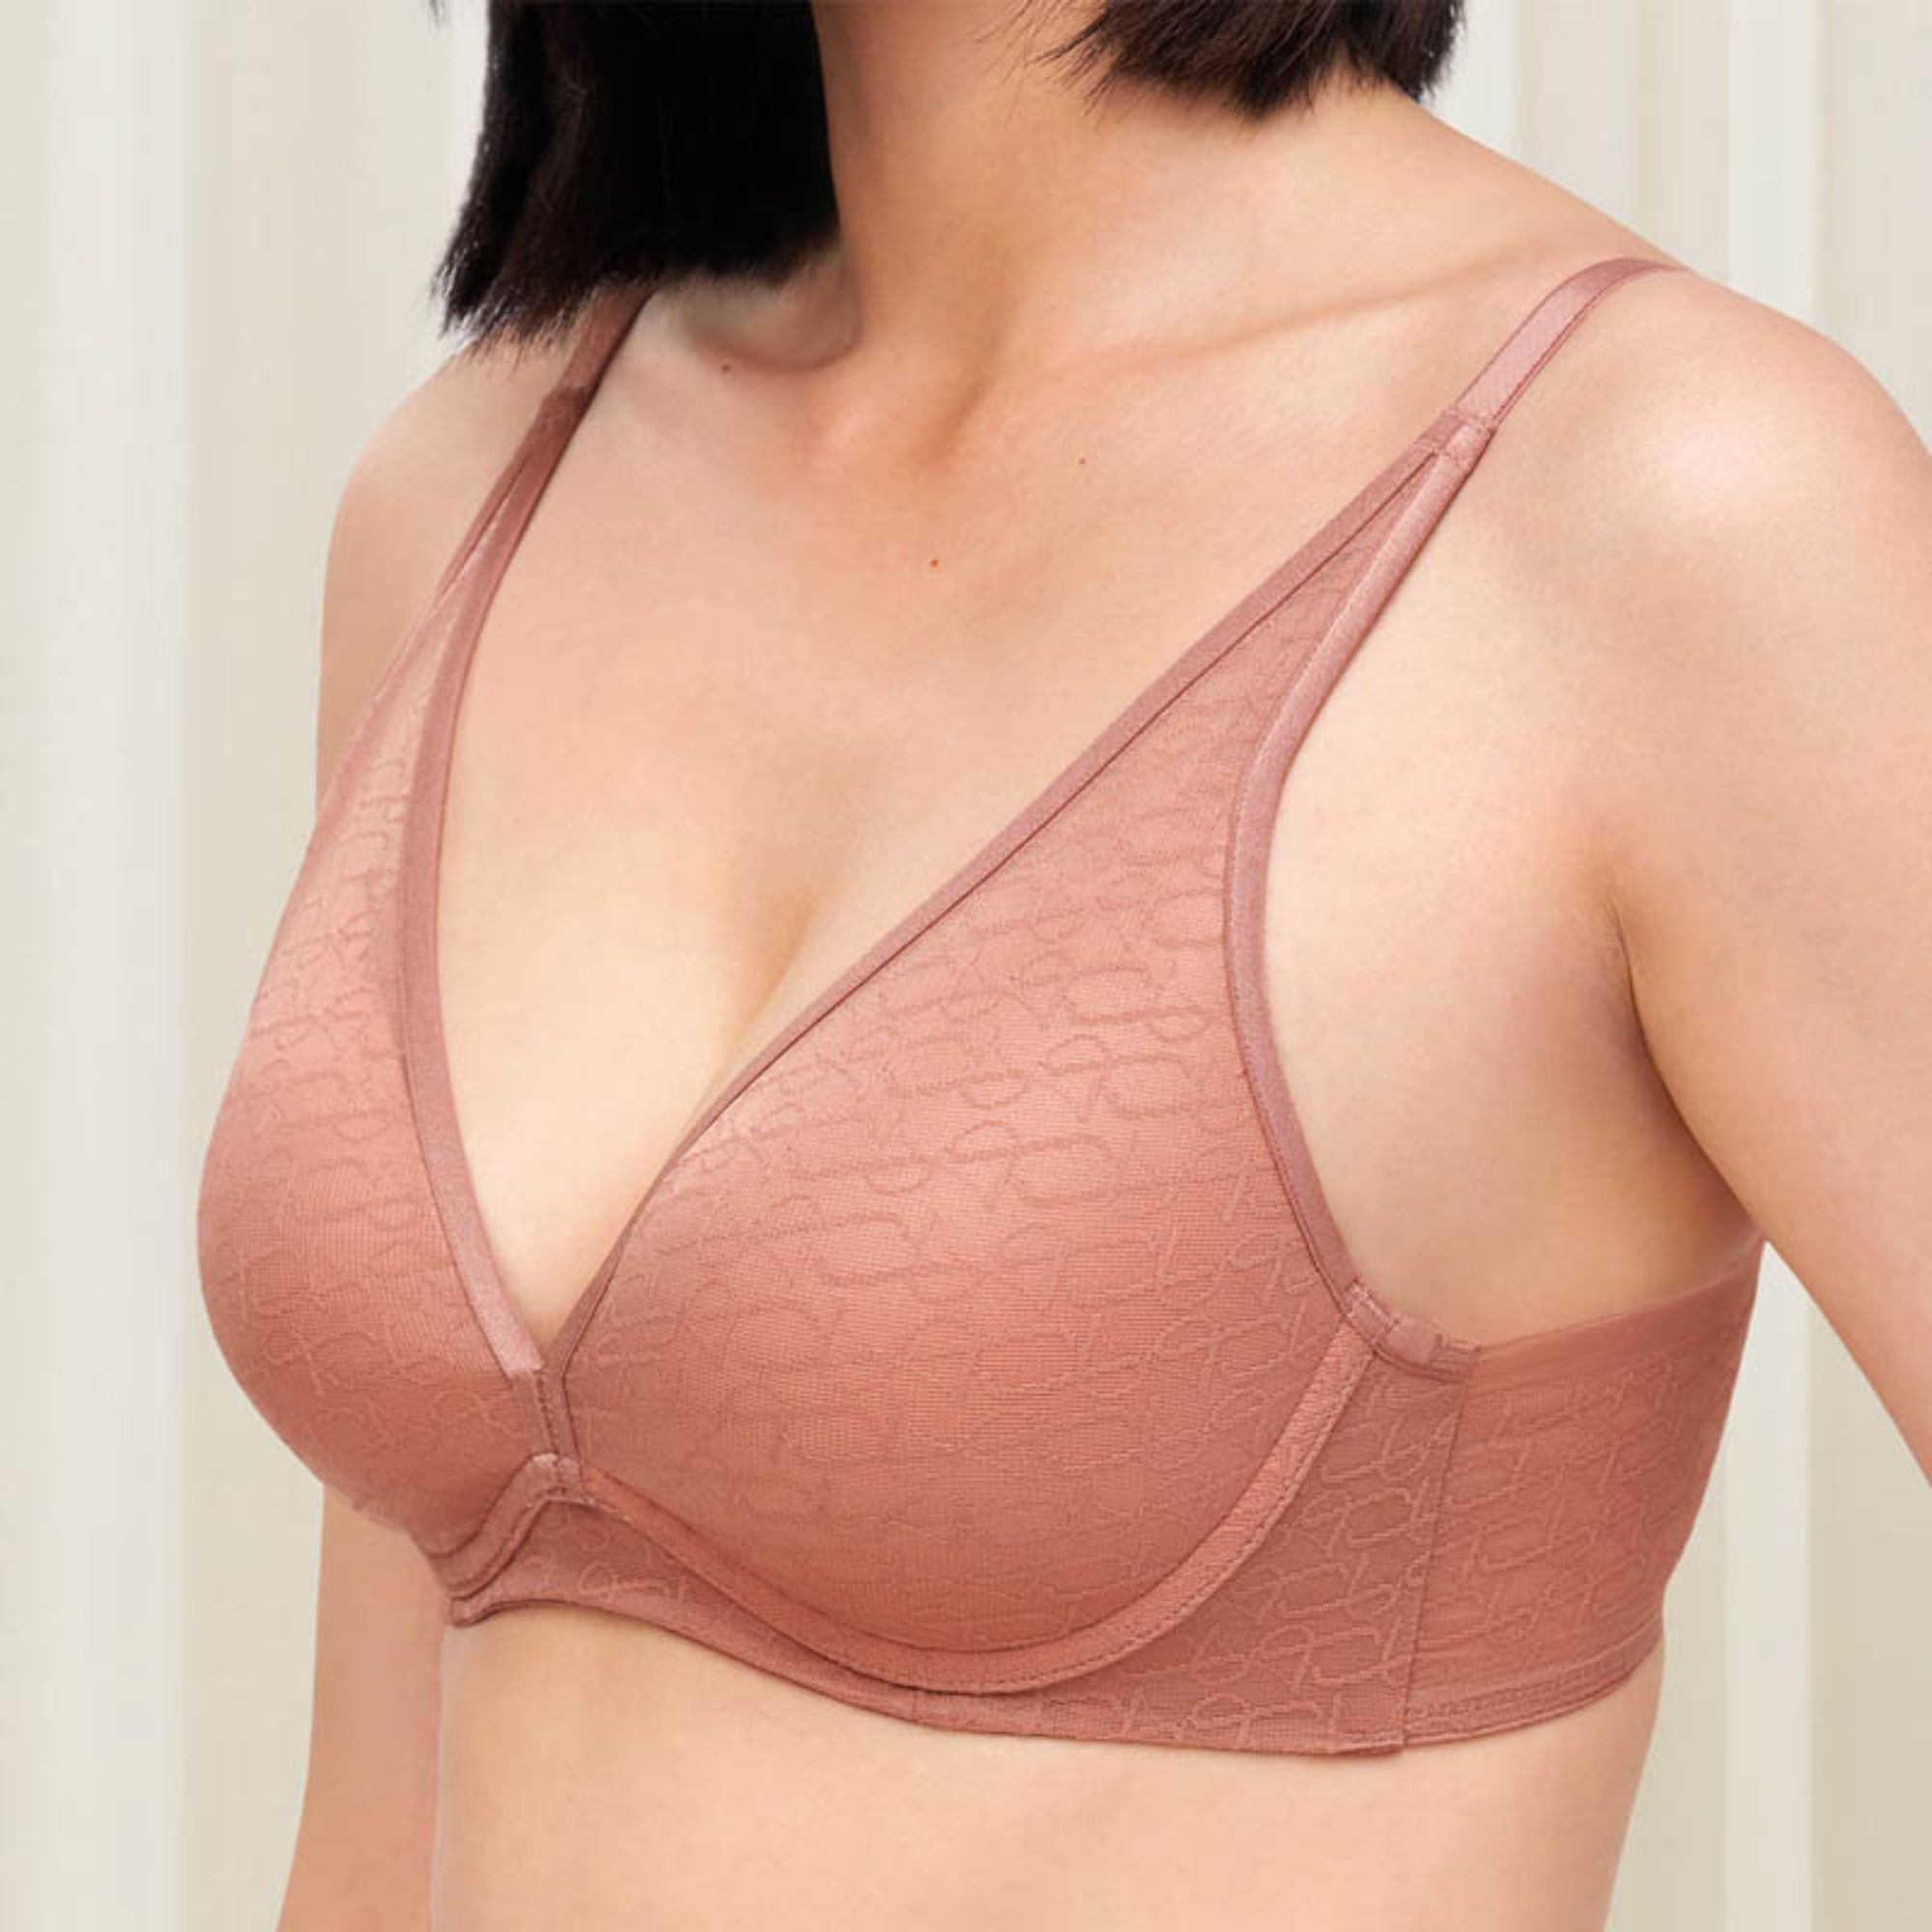 Triumph Signature Sheer Non-Wired Push Up Deep V Bra Toasted Almond